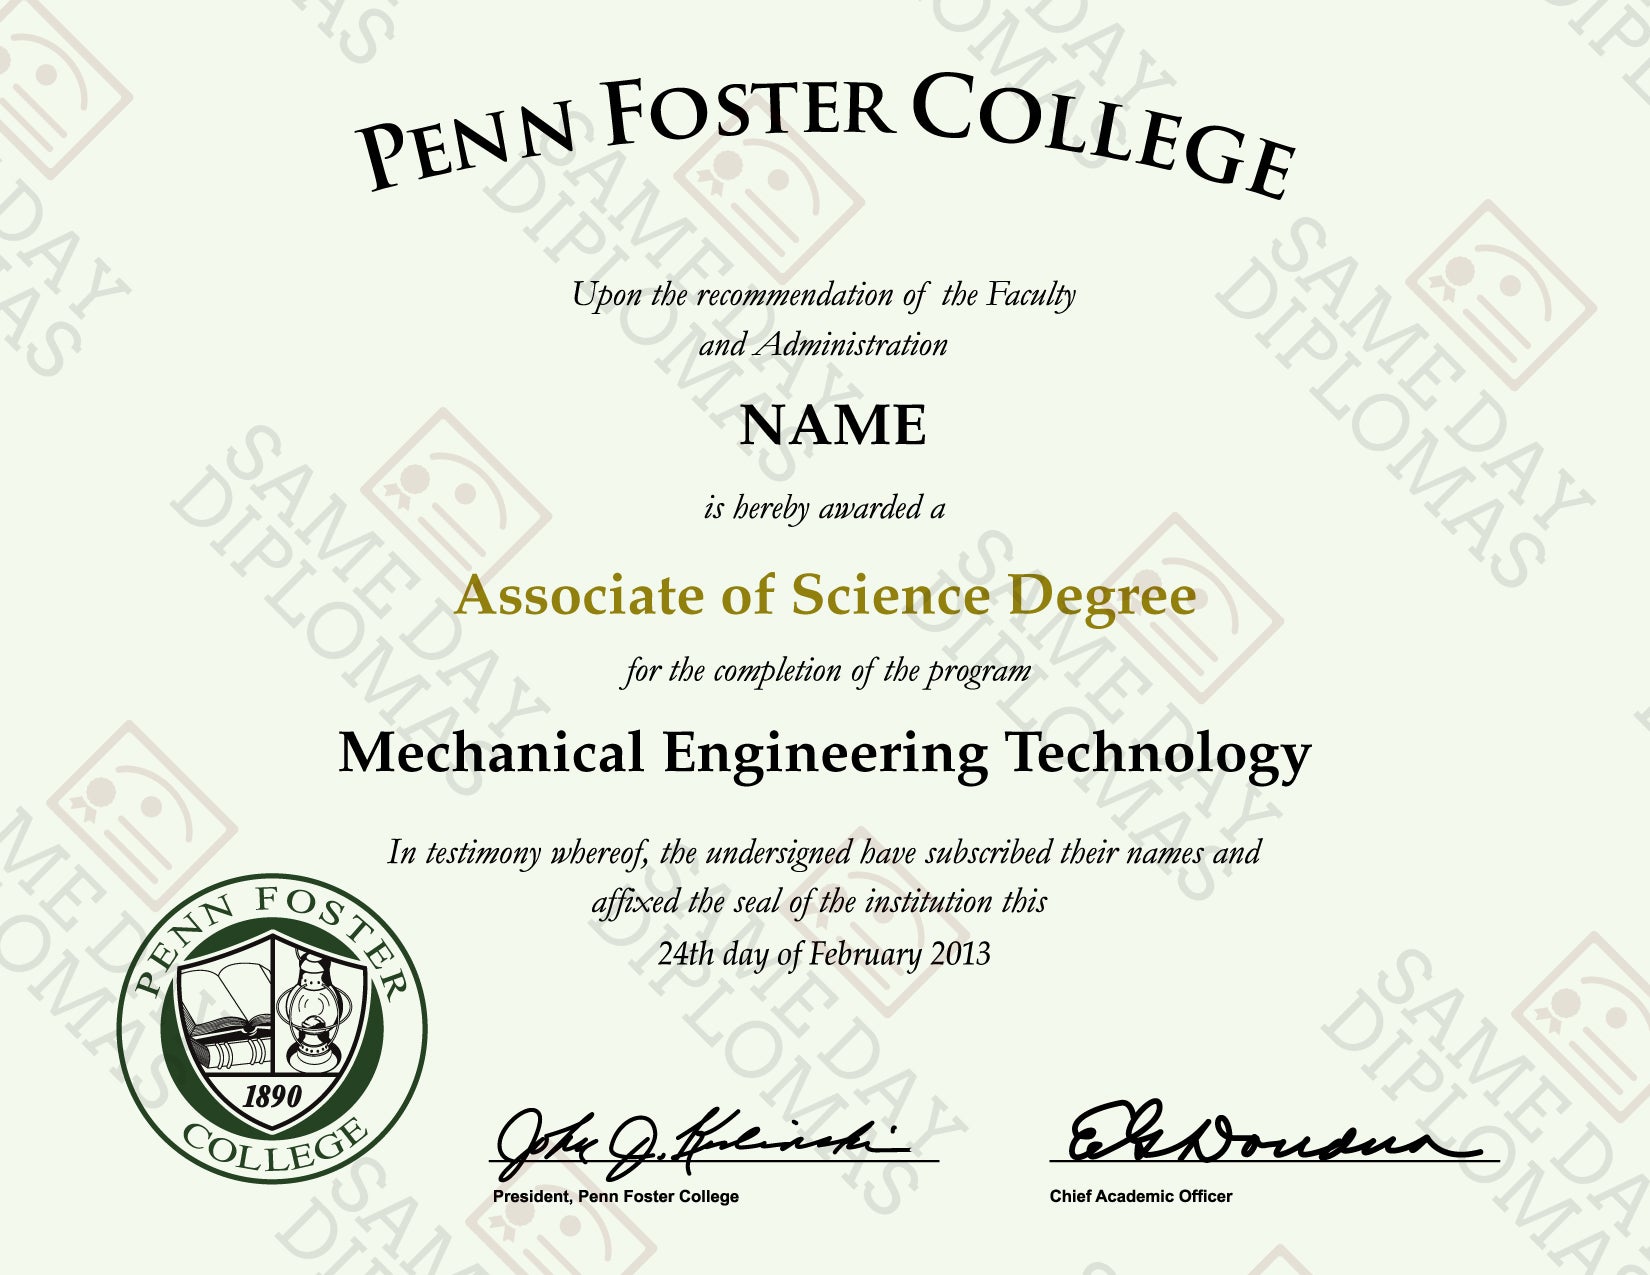 SD Penn Foster College Diploma Converted   Copy 47d3d4dc 9a10 4ded Bd1c Cf53b687f64d 1024x1024@2x ?v=1548185993